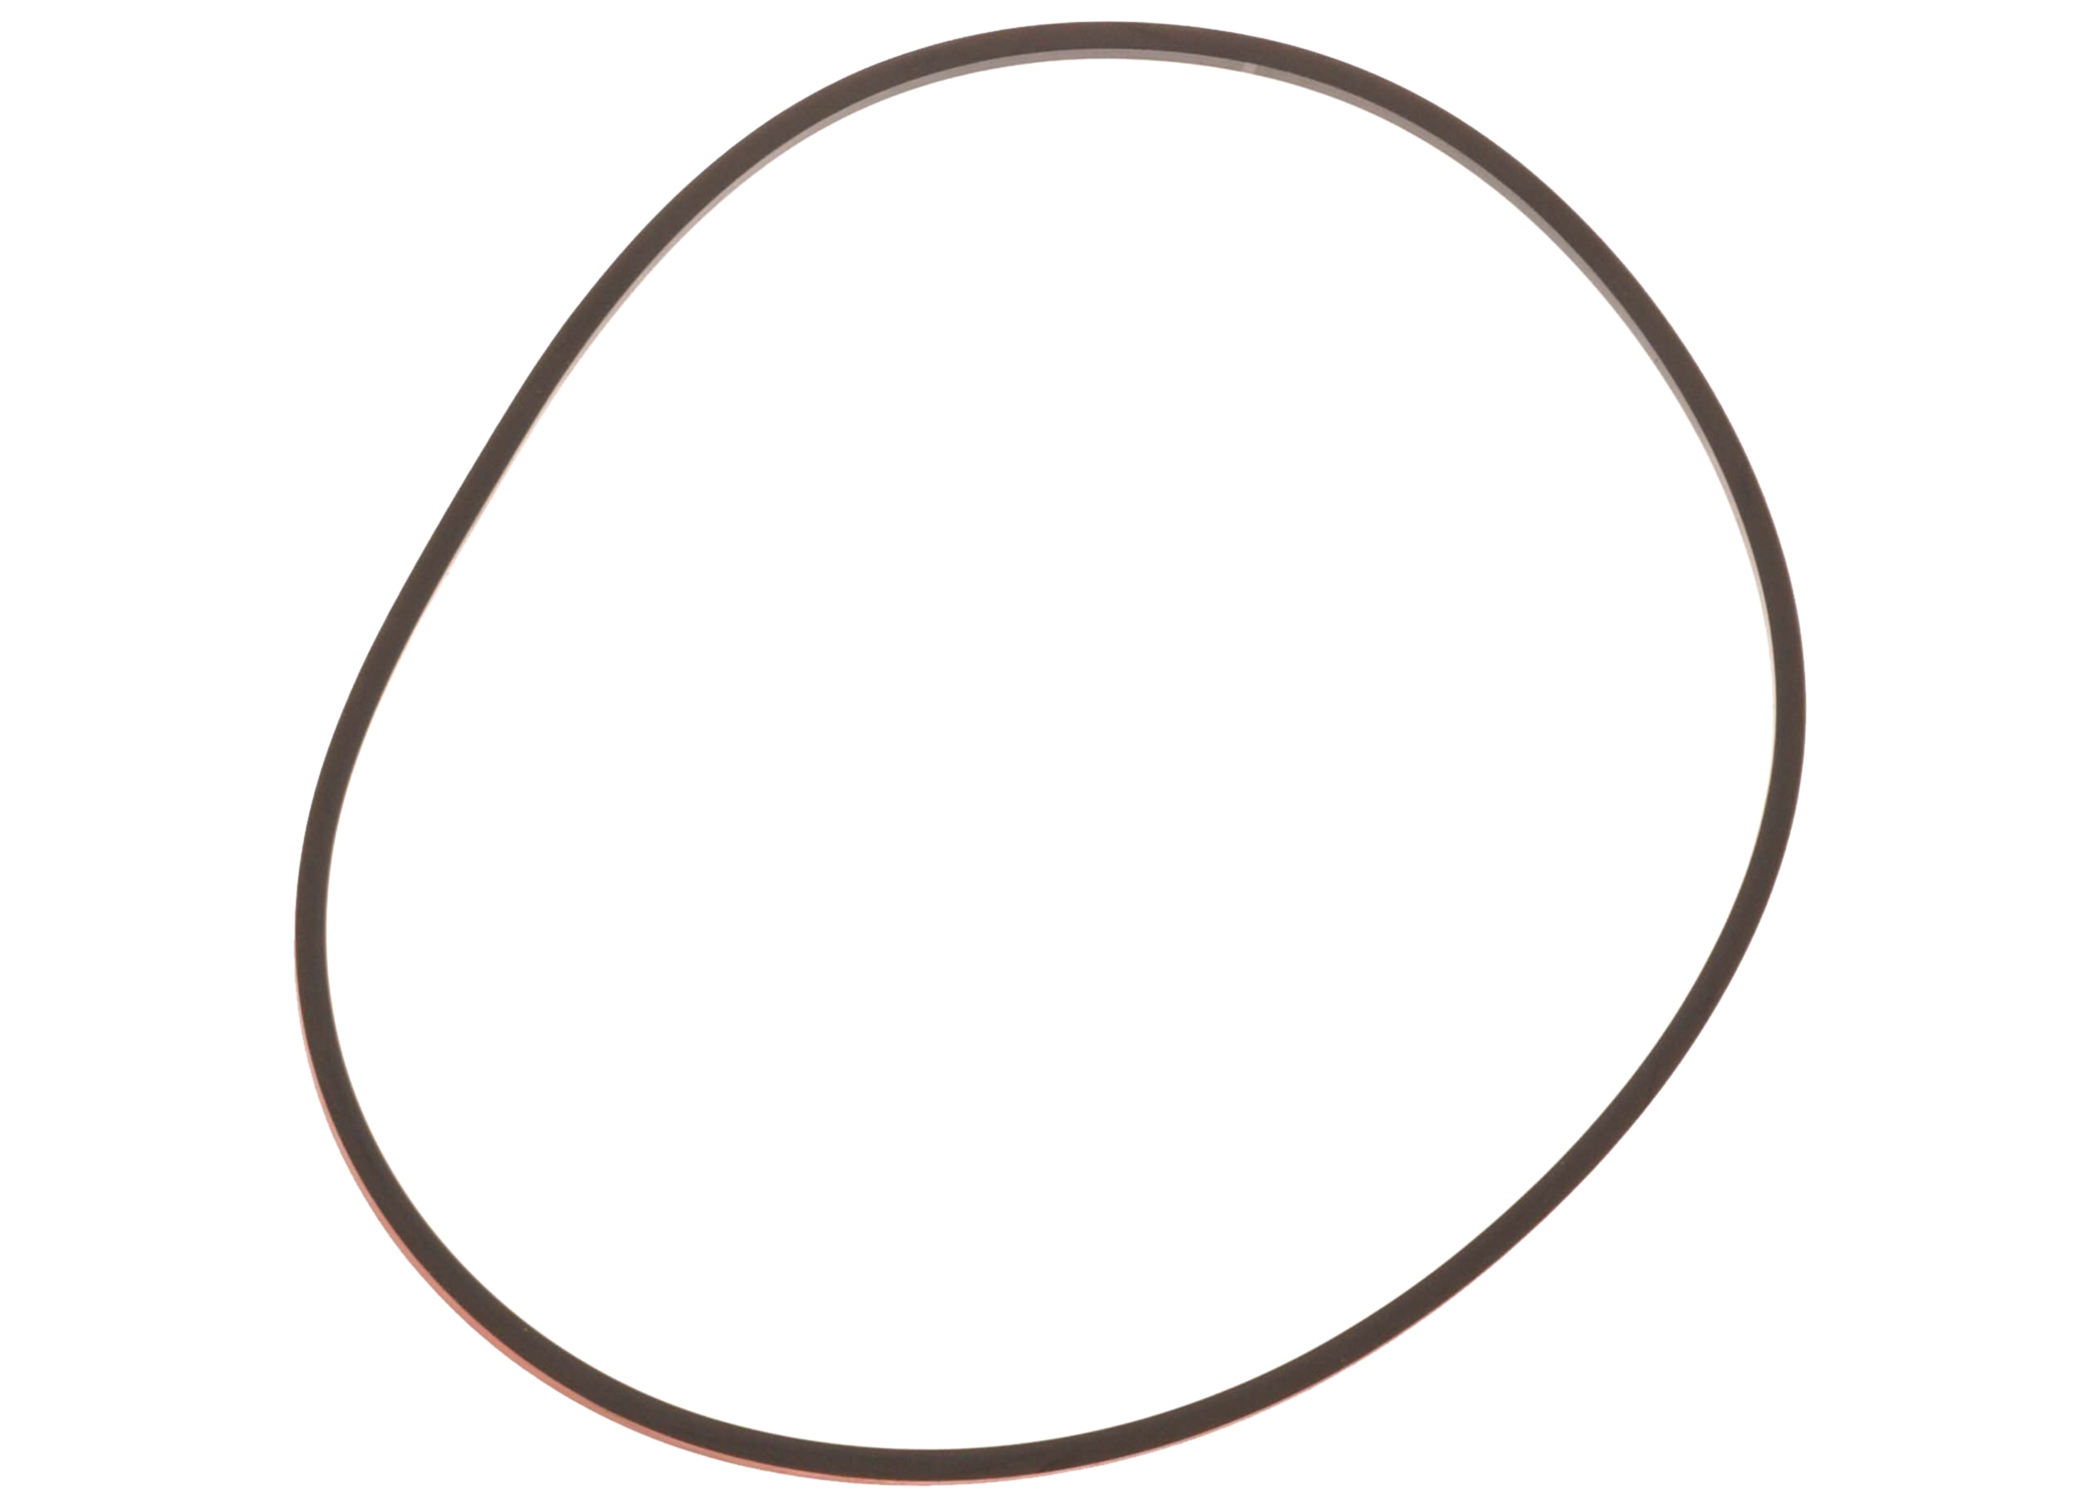 GM GENUINE PARTS CANADA - Automatic Transmission Extension Housing Gasket - GMC 24208660